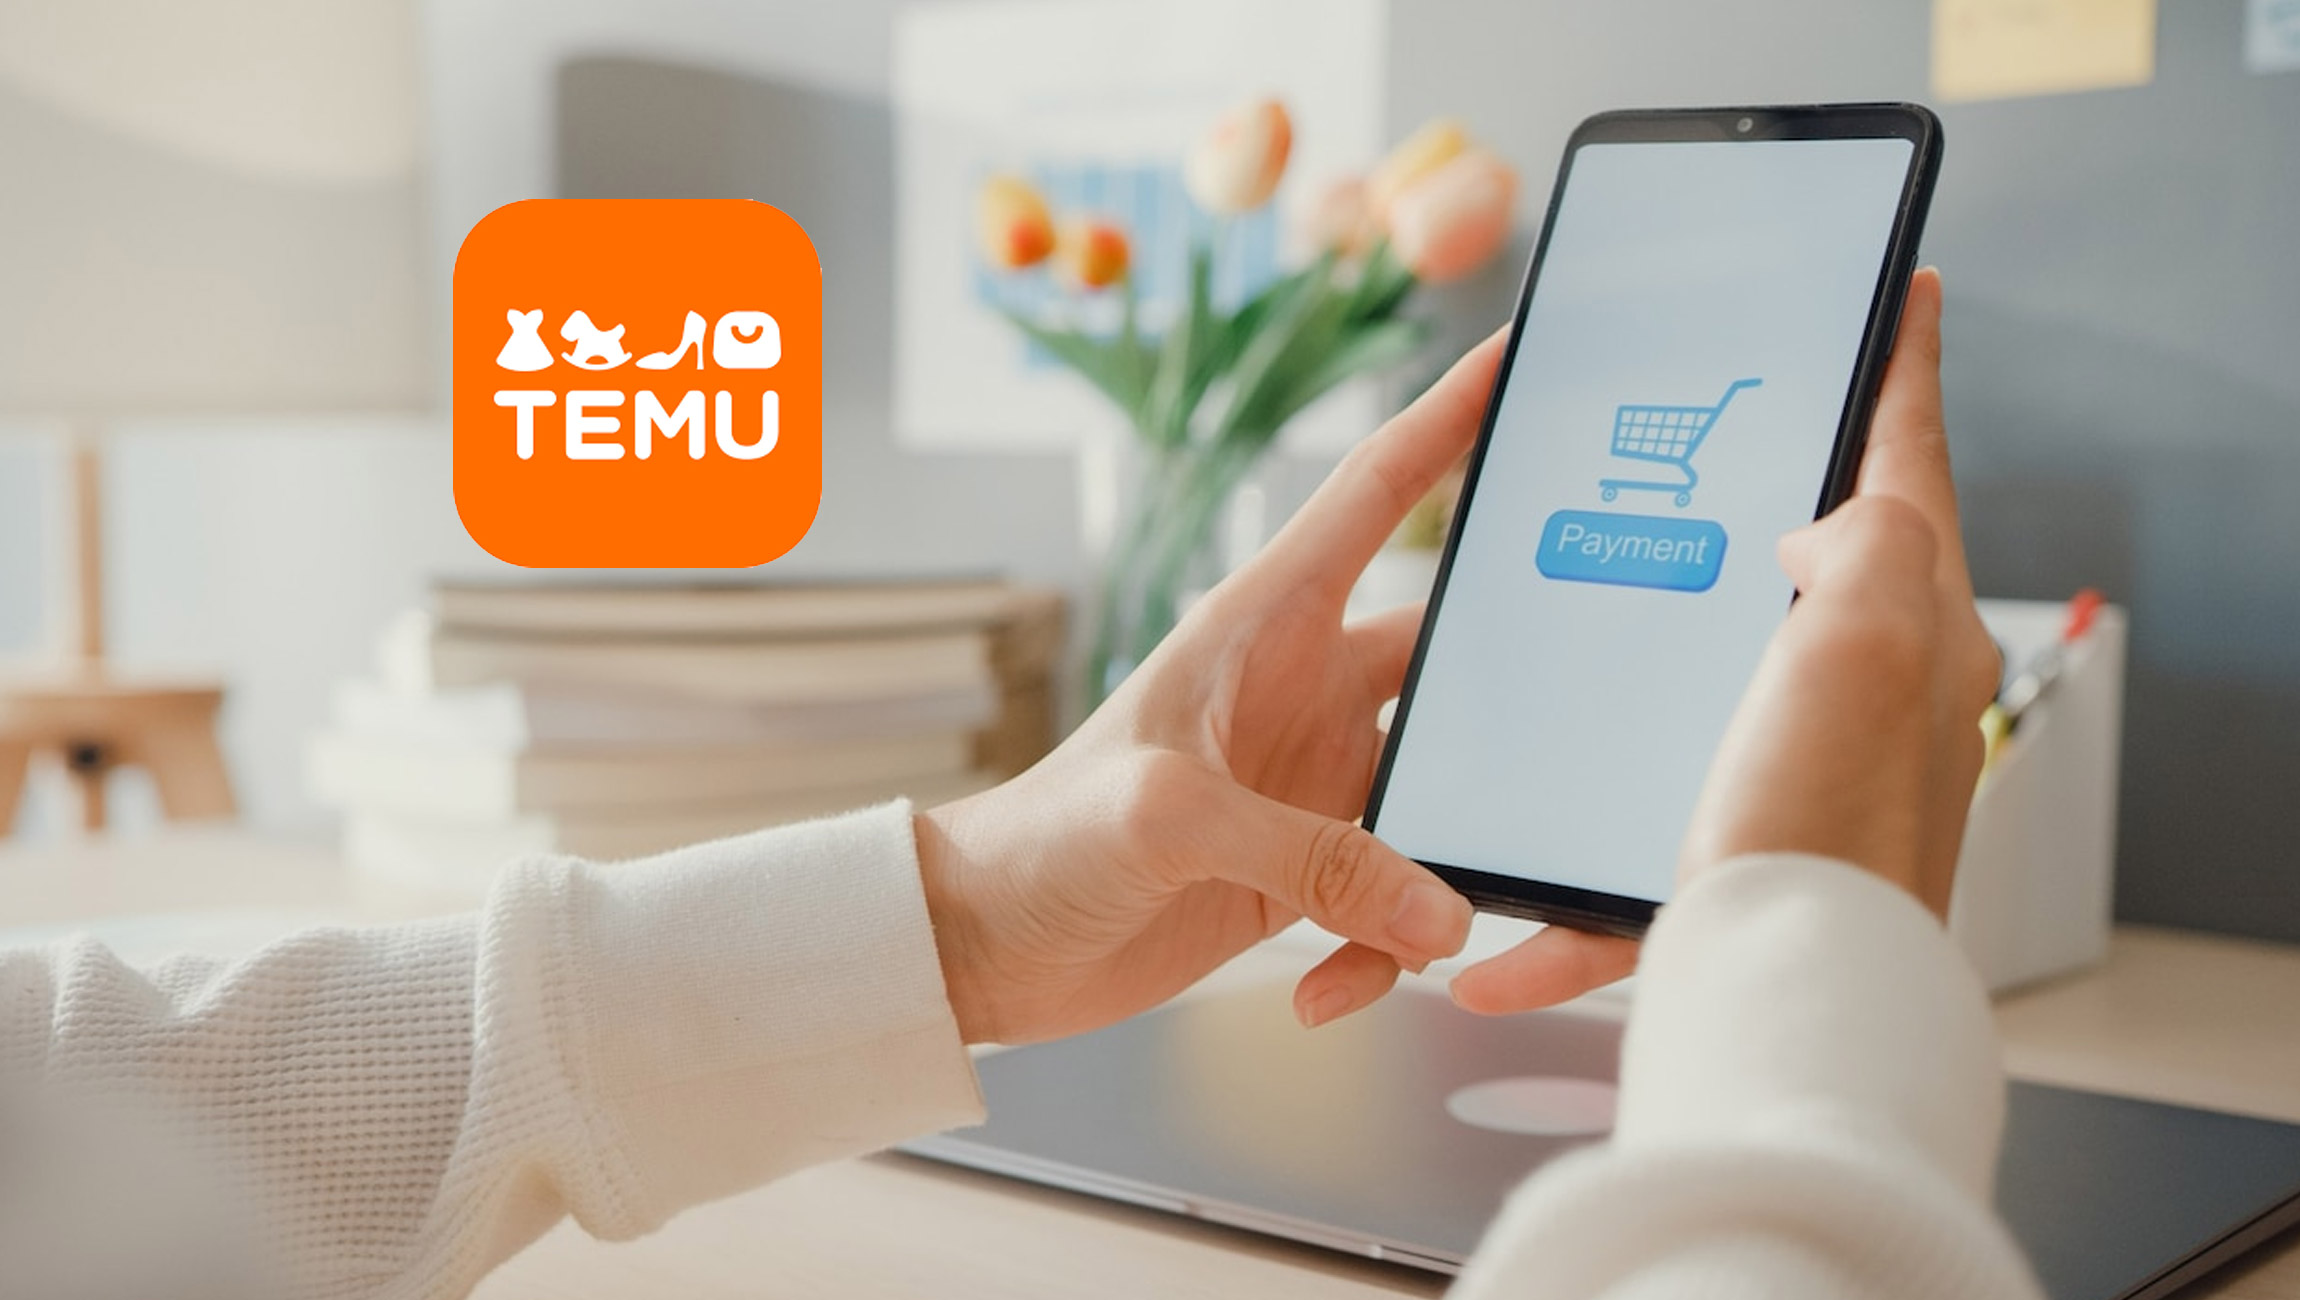 Temu Beefs Up Merchandise Range as More Suppliers Sign On to Newest E-Commerce Platform